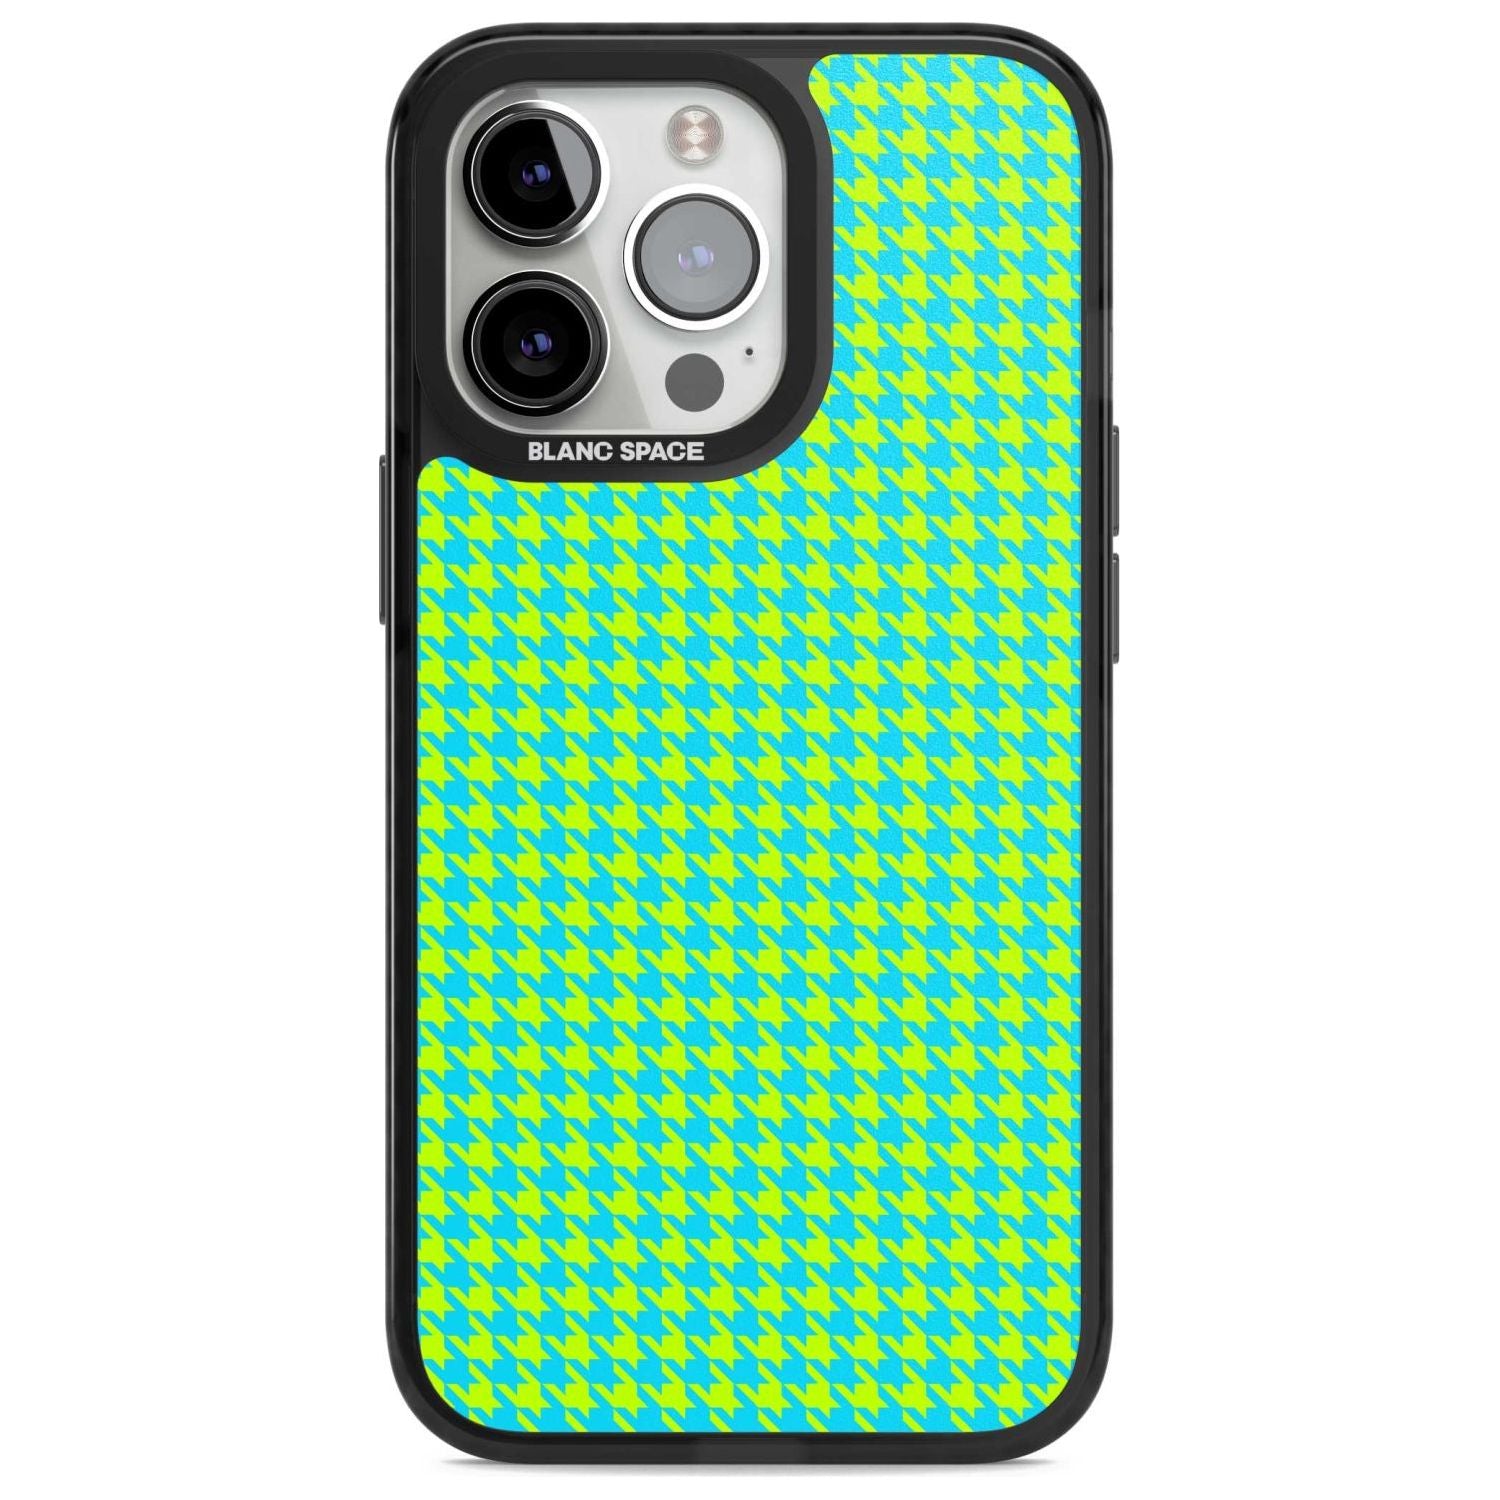 Neon Lime & Turquoise Houndstooth Pattern Phone Case iPhone 15 Pro Max / Magsafe Black Impact Case,iPhone 15 Pro / Magsafe Black Impact Case,iPhone 14 Pro Max / Magsafe Black Impact Case,iPhone 14 Pro / Magsafe Black Impact Case,iPhone 13 Pro / Magsafe Black Impact Case Blanc Space